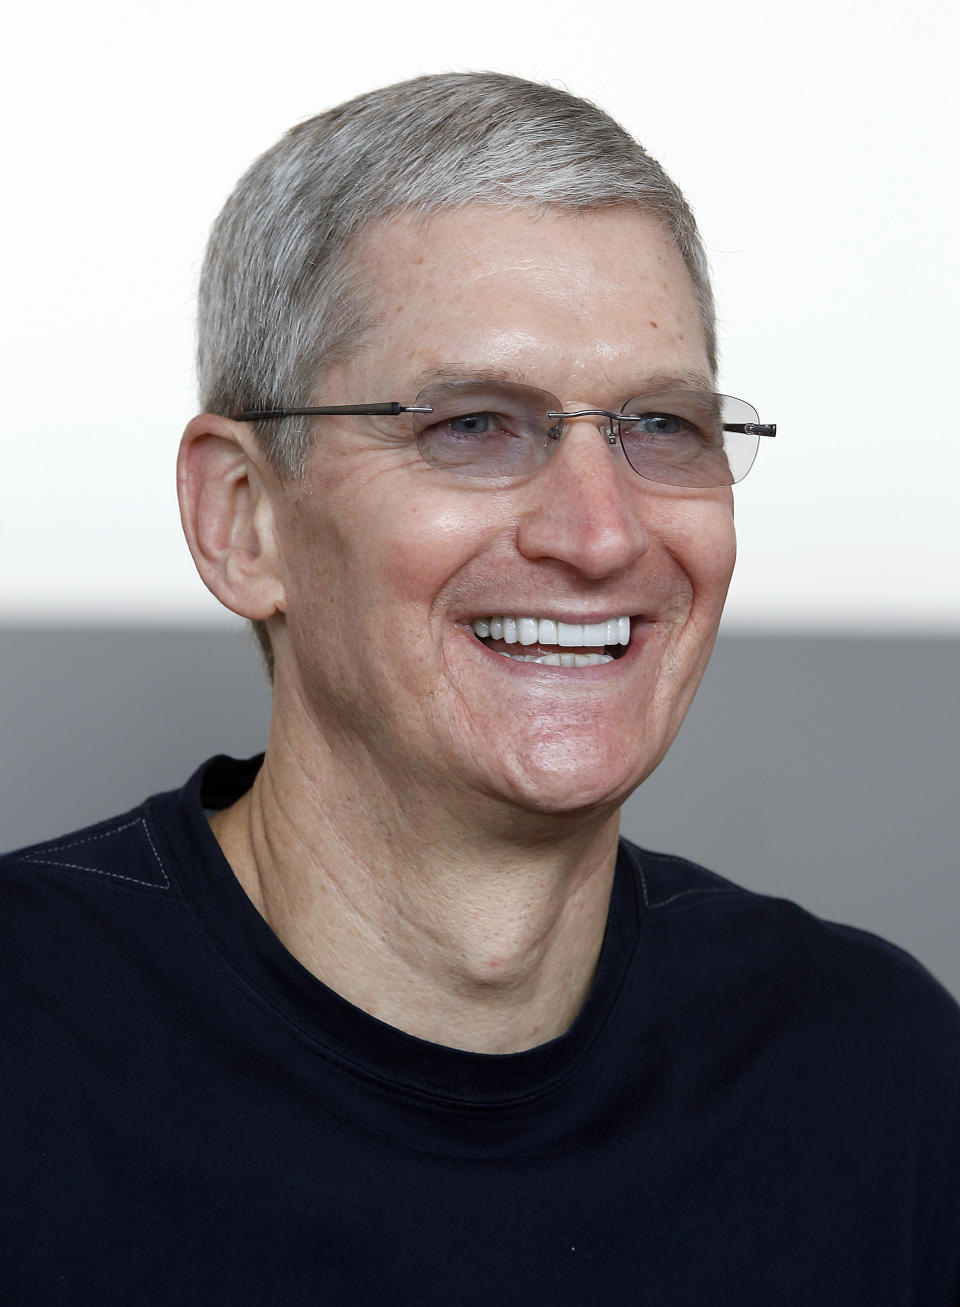 Ending years of speculation, Apple CEO Time Cook <a href="http://www.huffingtonpost.com/2014/10/30/tim-cook-gay_n_6074016.html" target="_blank">officially came out as gay earlier this year</a> in a powerful Businessweek essay. Cook clarified in the essay that he has never denied being gay, but just never spoken publicly about his sexuality until that time. "Being gay has given me a deeper understanding of what it means to be in the minority and provided a window into the challenges that people in other minority groups deal with every day," Cook wrote.  <a href="http://www.businessweek.com/articles/2014-10-30/tim-cook-im-proud-to-be-gay" target="_blank">Head here </a>to read the essay in full.